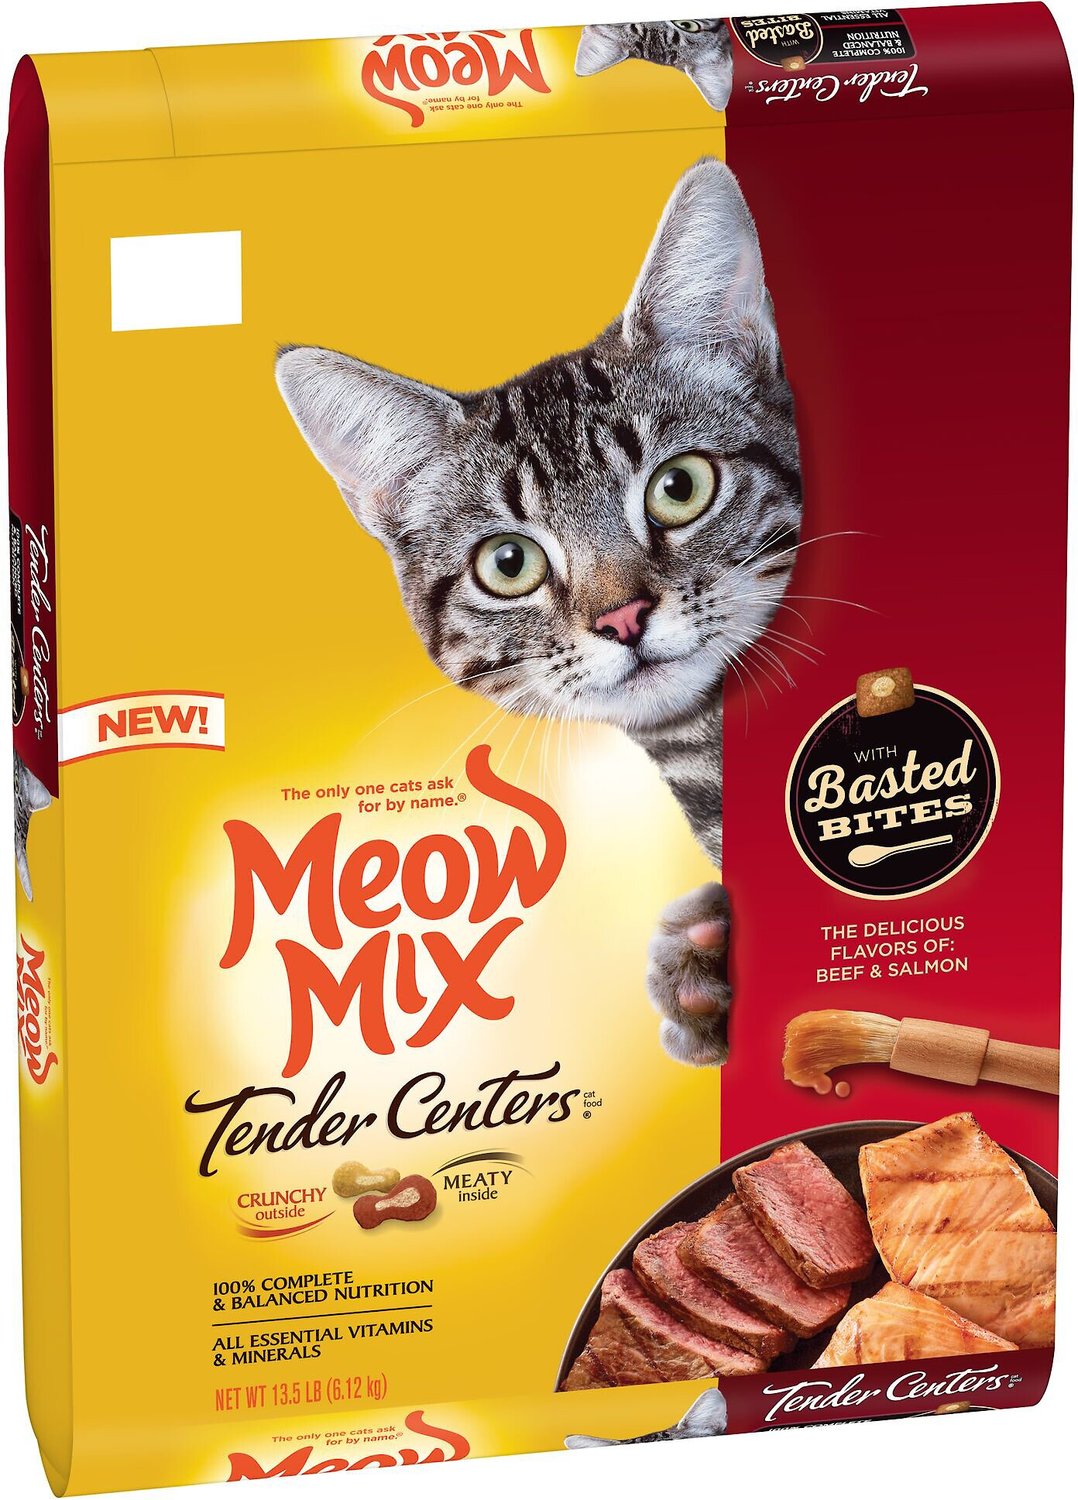 MEOW MIX Tender Centers Basted Bites Beef & Salmon Flavors Dry Cat Food